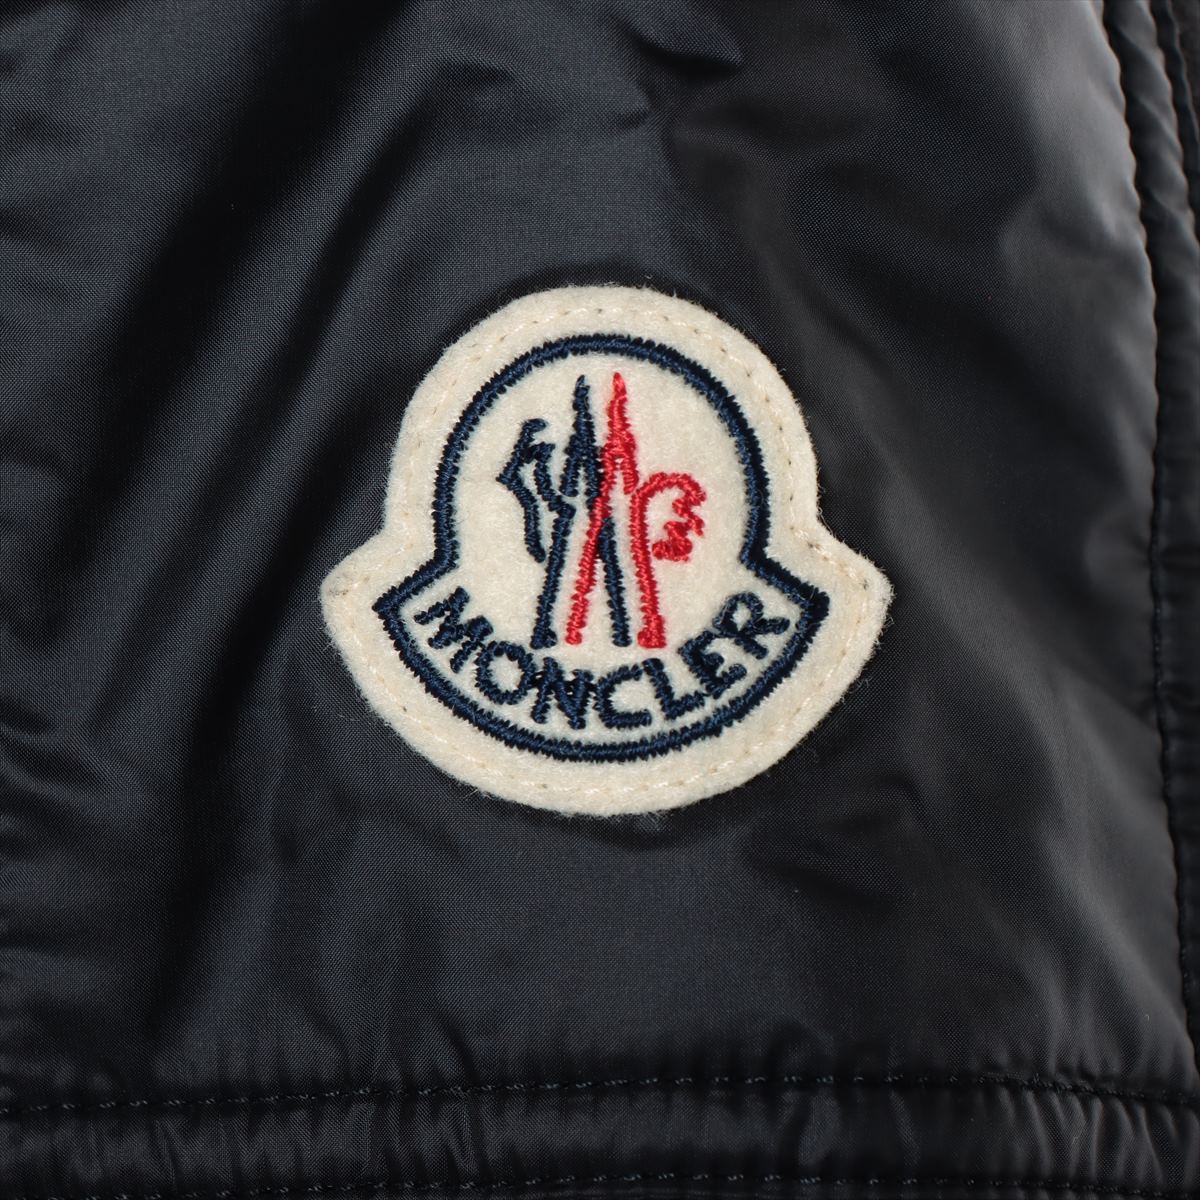 Moncler 21 years Cotton & nylon Poncho UNI Unisex Black  Down material on the hood H20933G00008